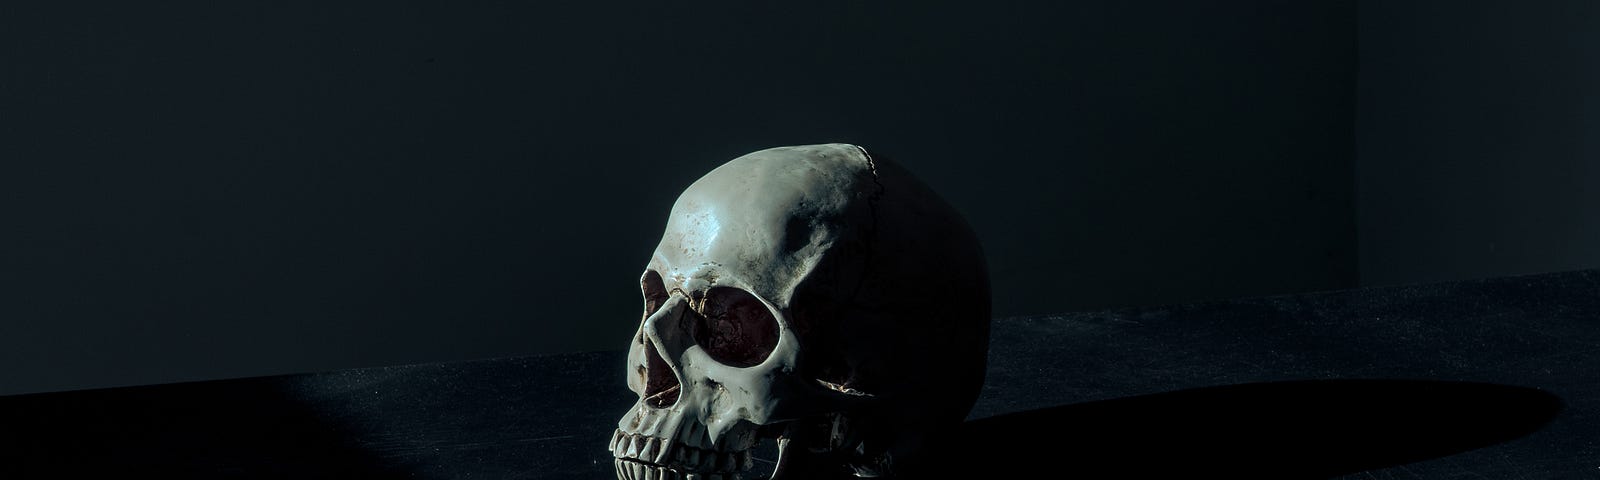 A human skull resting on a table, with a dark background.